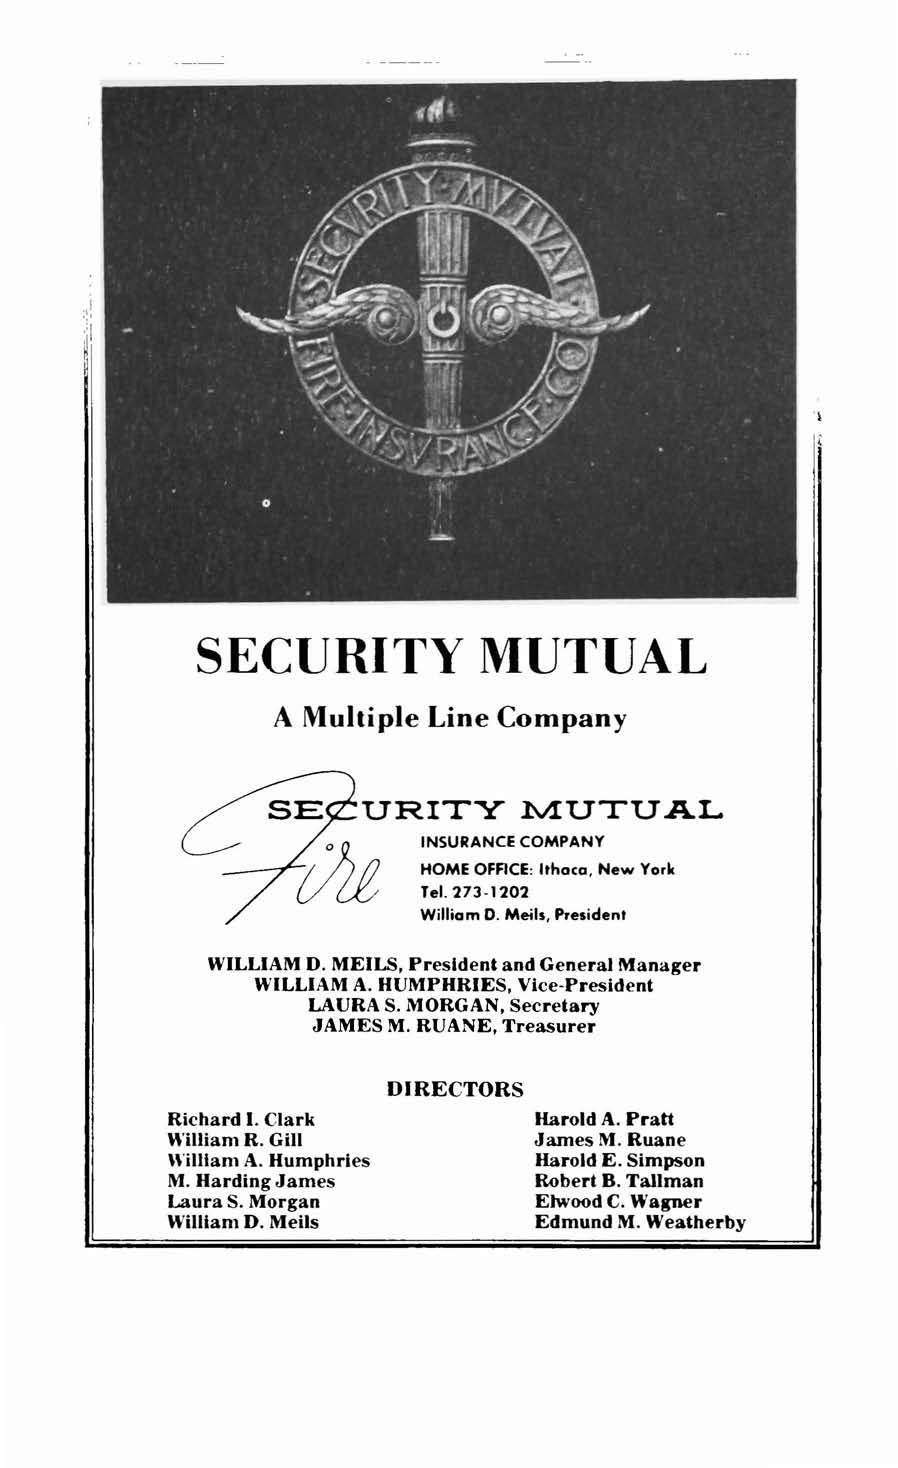 SECURITY MUTUAL A Multiple Line Company URITY lviutual INSURANCE COMPANY HOME OFFICE: Ithaca, New York Tel. 273-1202 William D. Metis, PTesidenl WILLIAM D. MEILS.